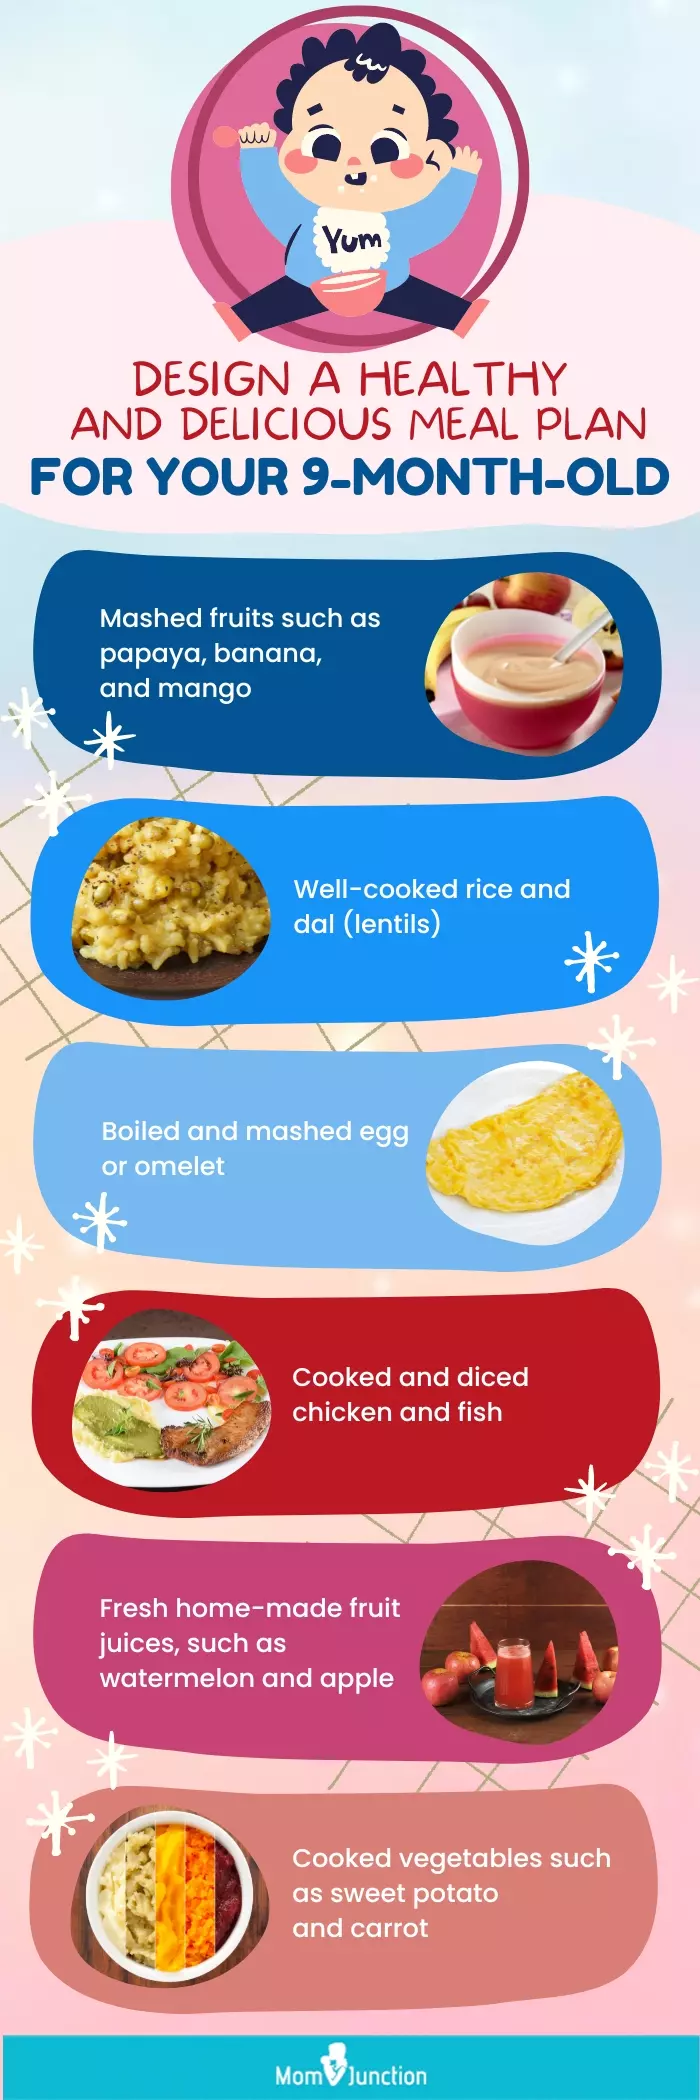 design a healthy and delicious meal plan for your 9 month old (infographic)